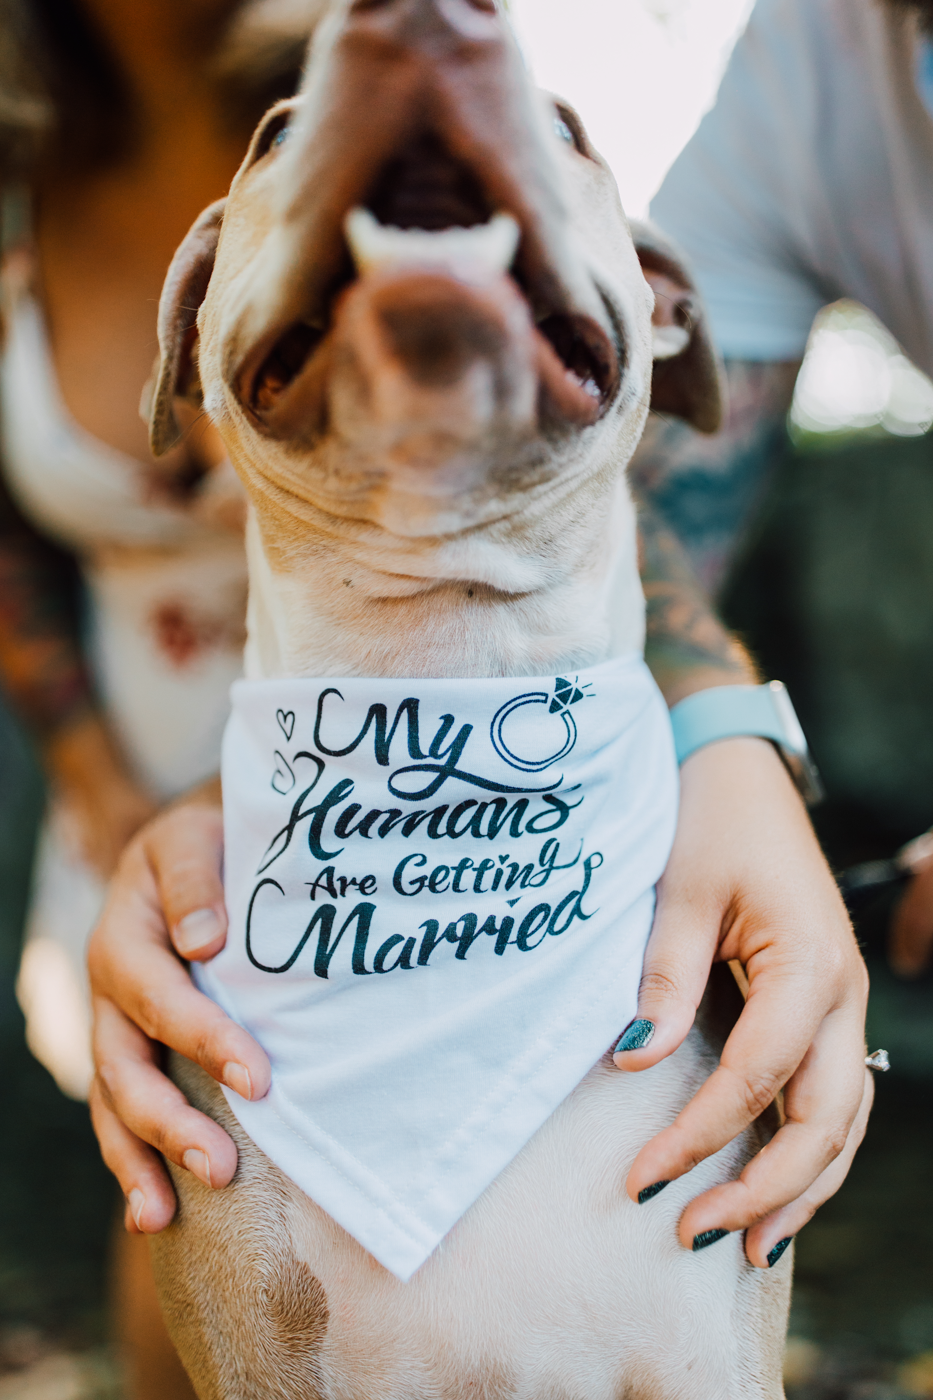  Engaged photos with dog wearing a bandana that says “My humans are getting married” 